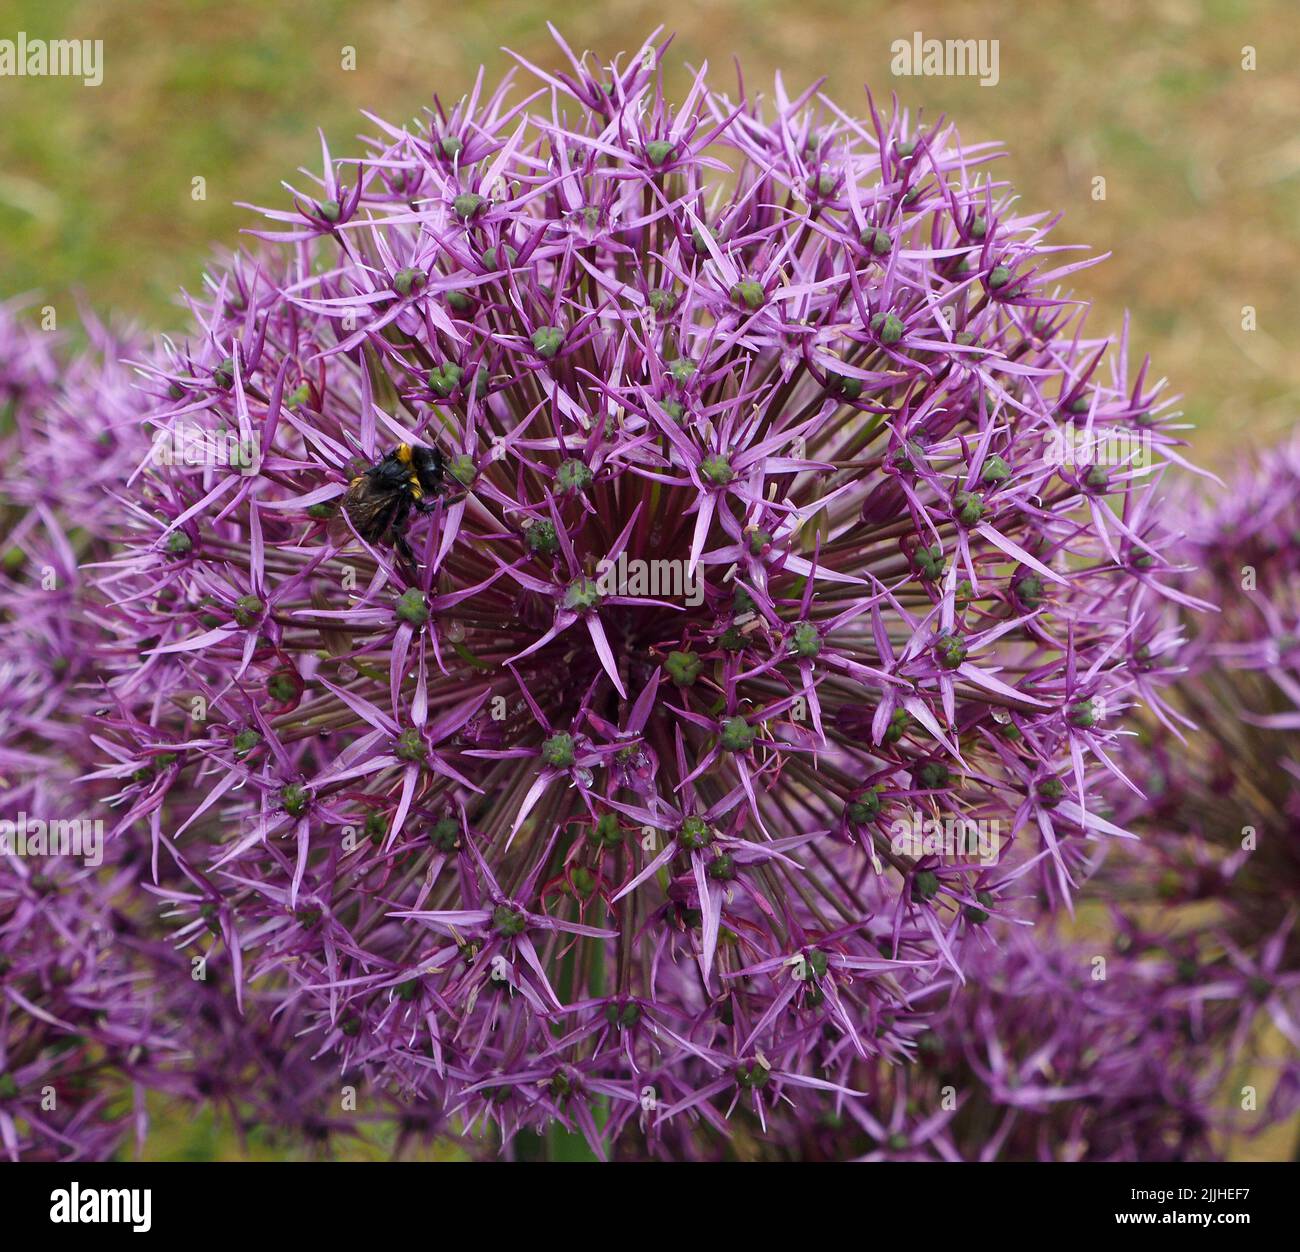 Close up macro shot of a single inflorescence of Allium Round 'n Purple showing the various flowerlets with a bee collecting nectar. Stock Photo